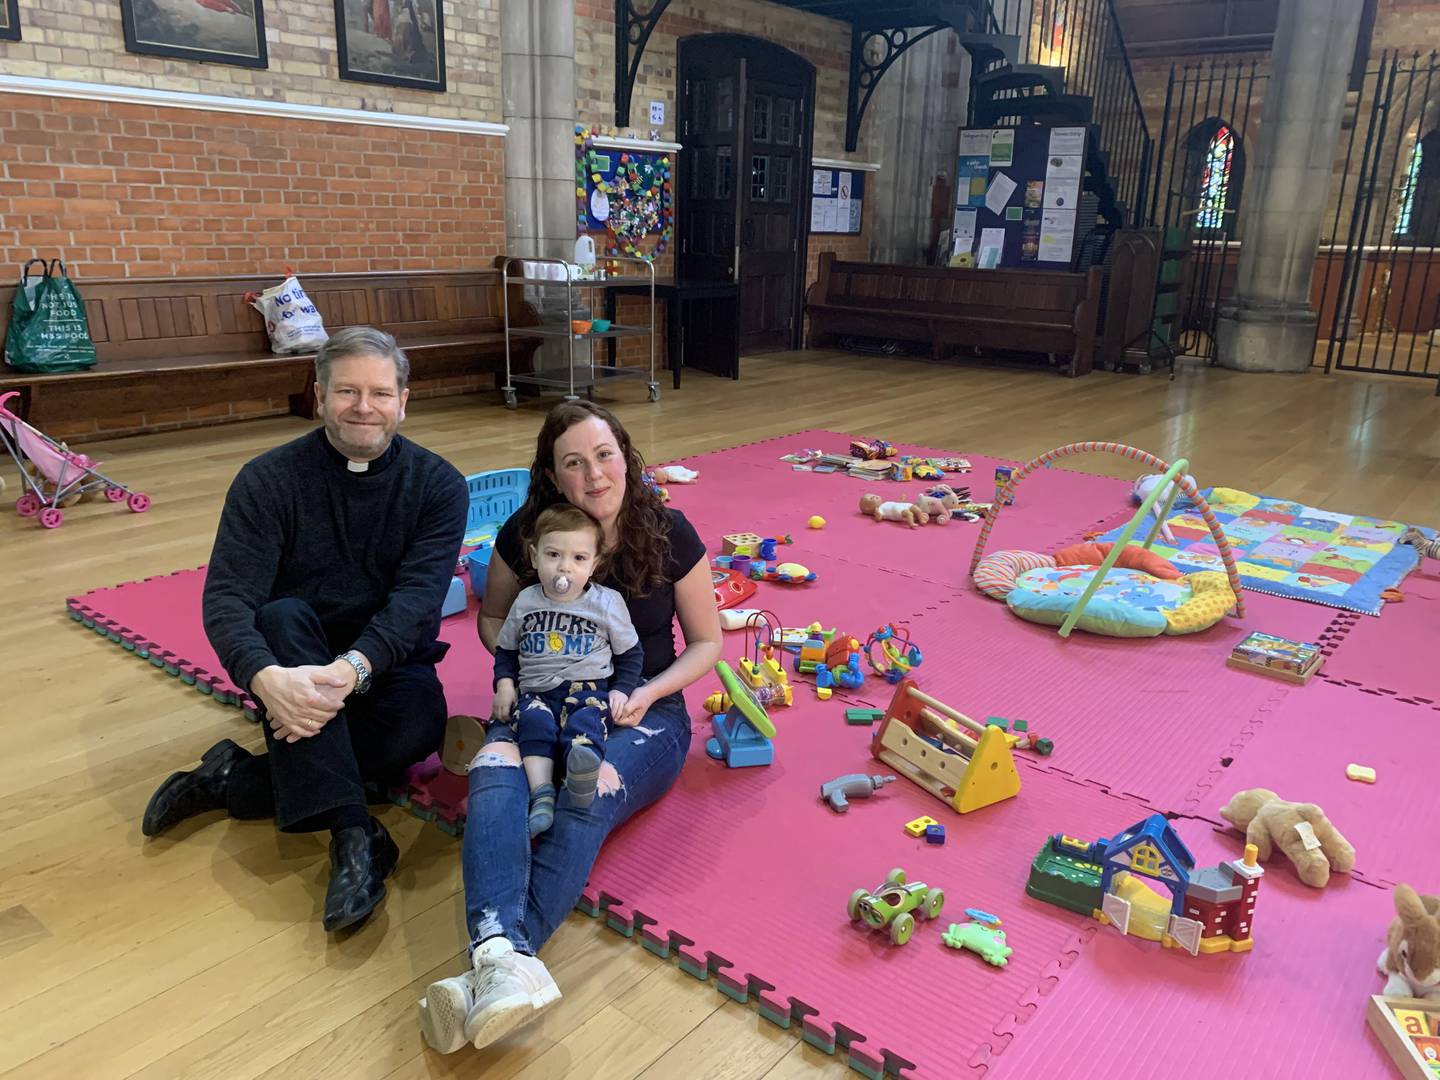 Father Jonathan Kester, Anglican parish priest at Emmanuel Church in West Hampstead, with Hollie Thomas and her 21-month-old son Bobby Cooper. Father Kester and Ms Thomas welcomed the news that local woman Nazanin Zaghari-Ratcliffe had come home. Laura O'Callaghan / The National